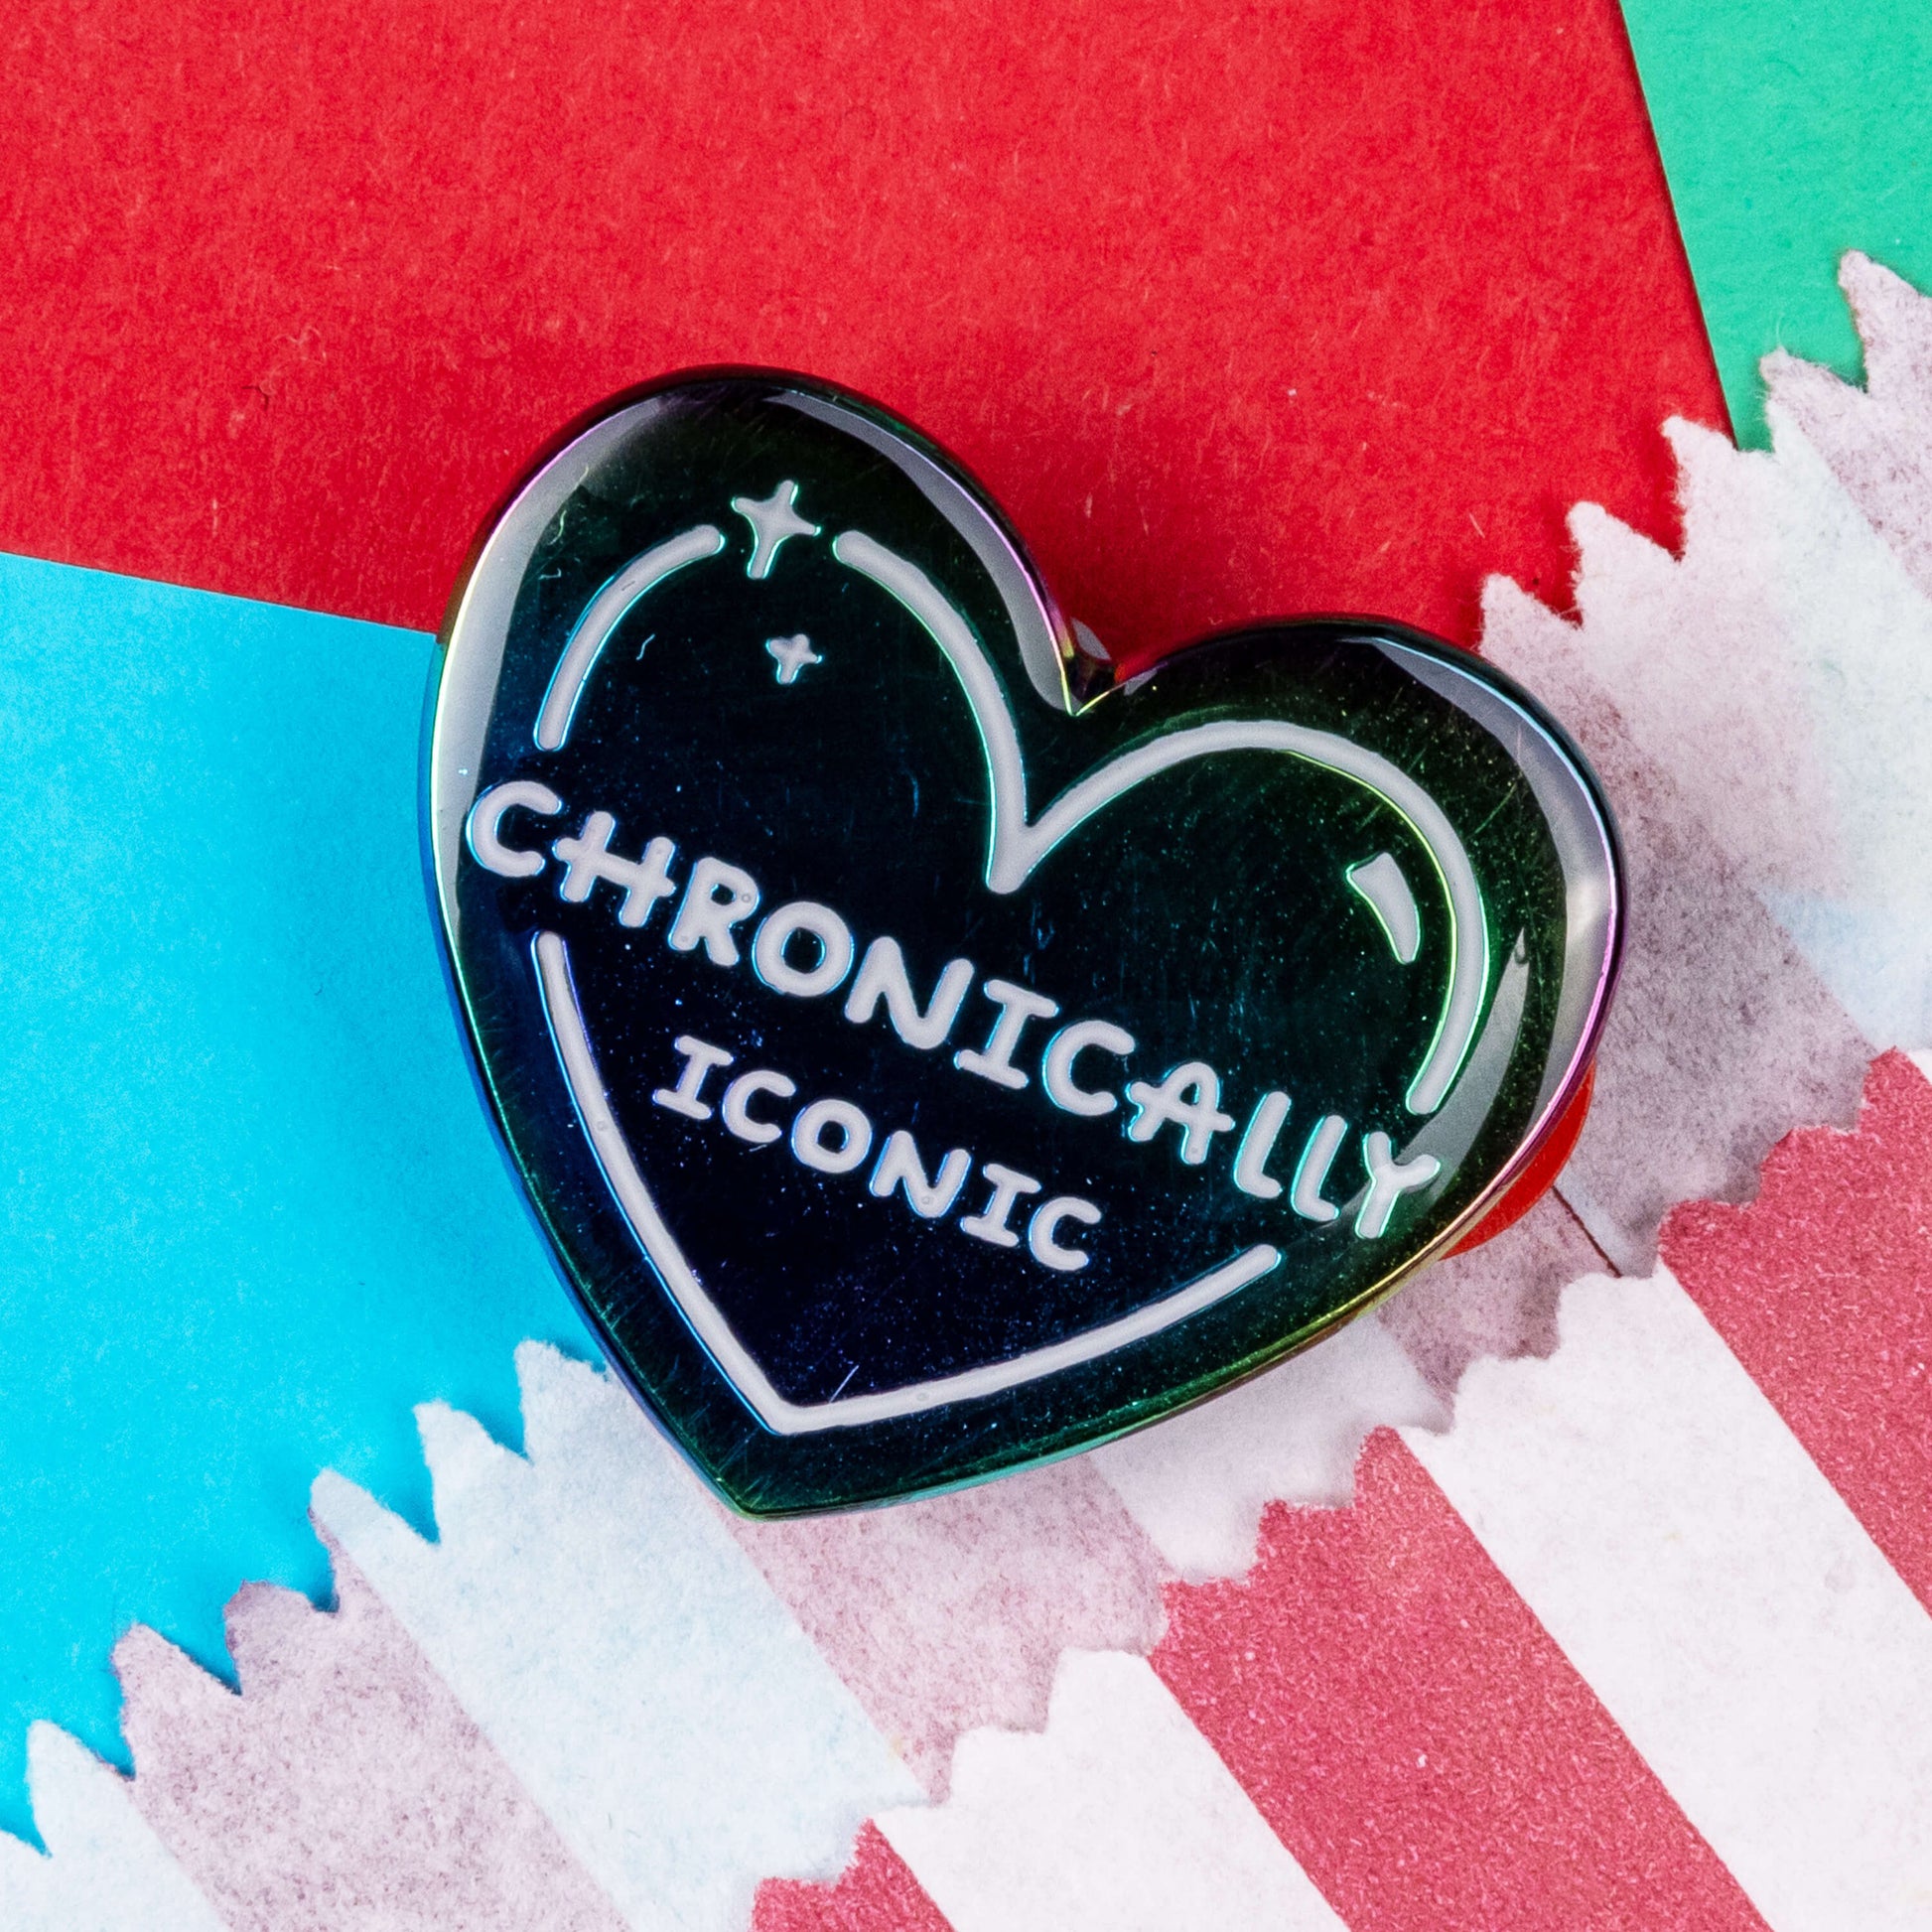 The Chronically Iconic Enamel Pin on a red and blue background. The anodised rainbow heart shaped pin has a white outline with sparkles and text reading 'chronically iconic'. The design was created to raise awareness for chronic illness and invisible illness.